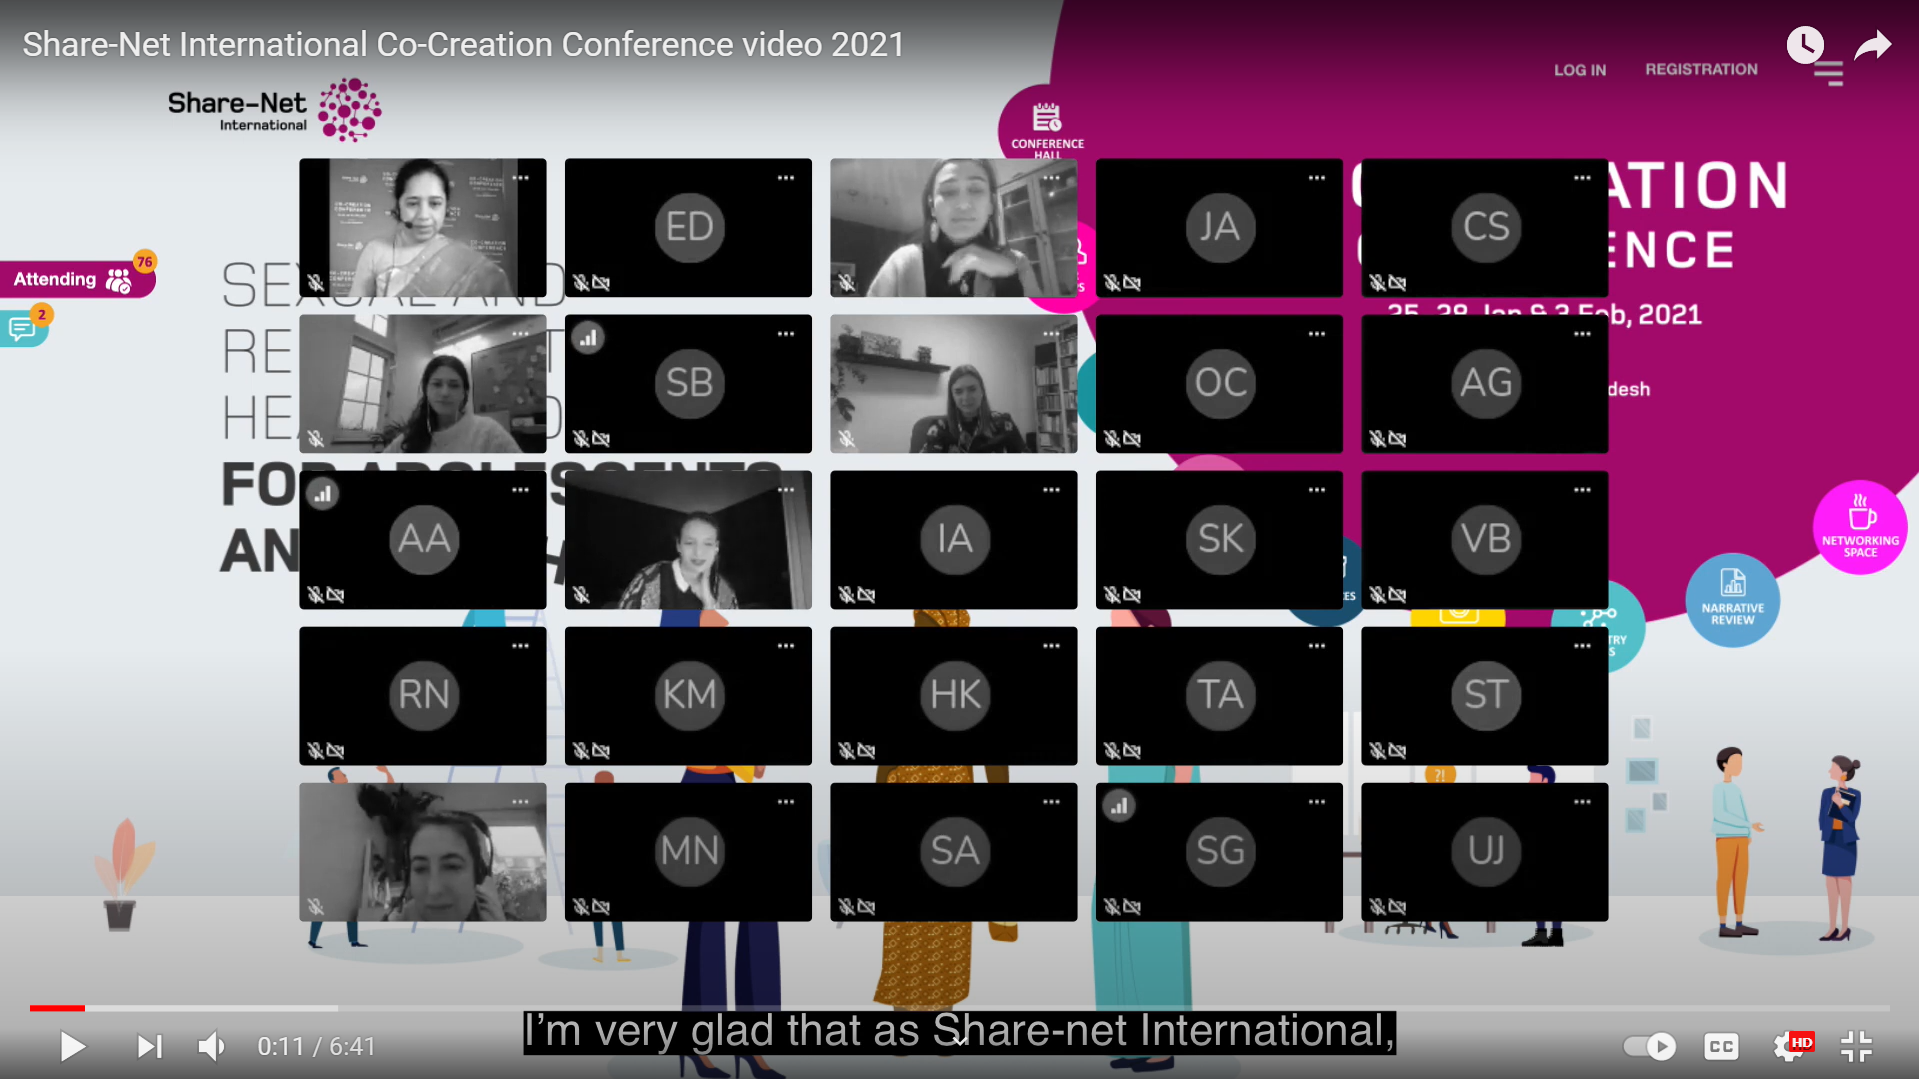 Share-Net International Co-Creation Conference video 2021